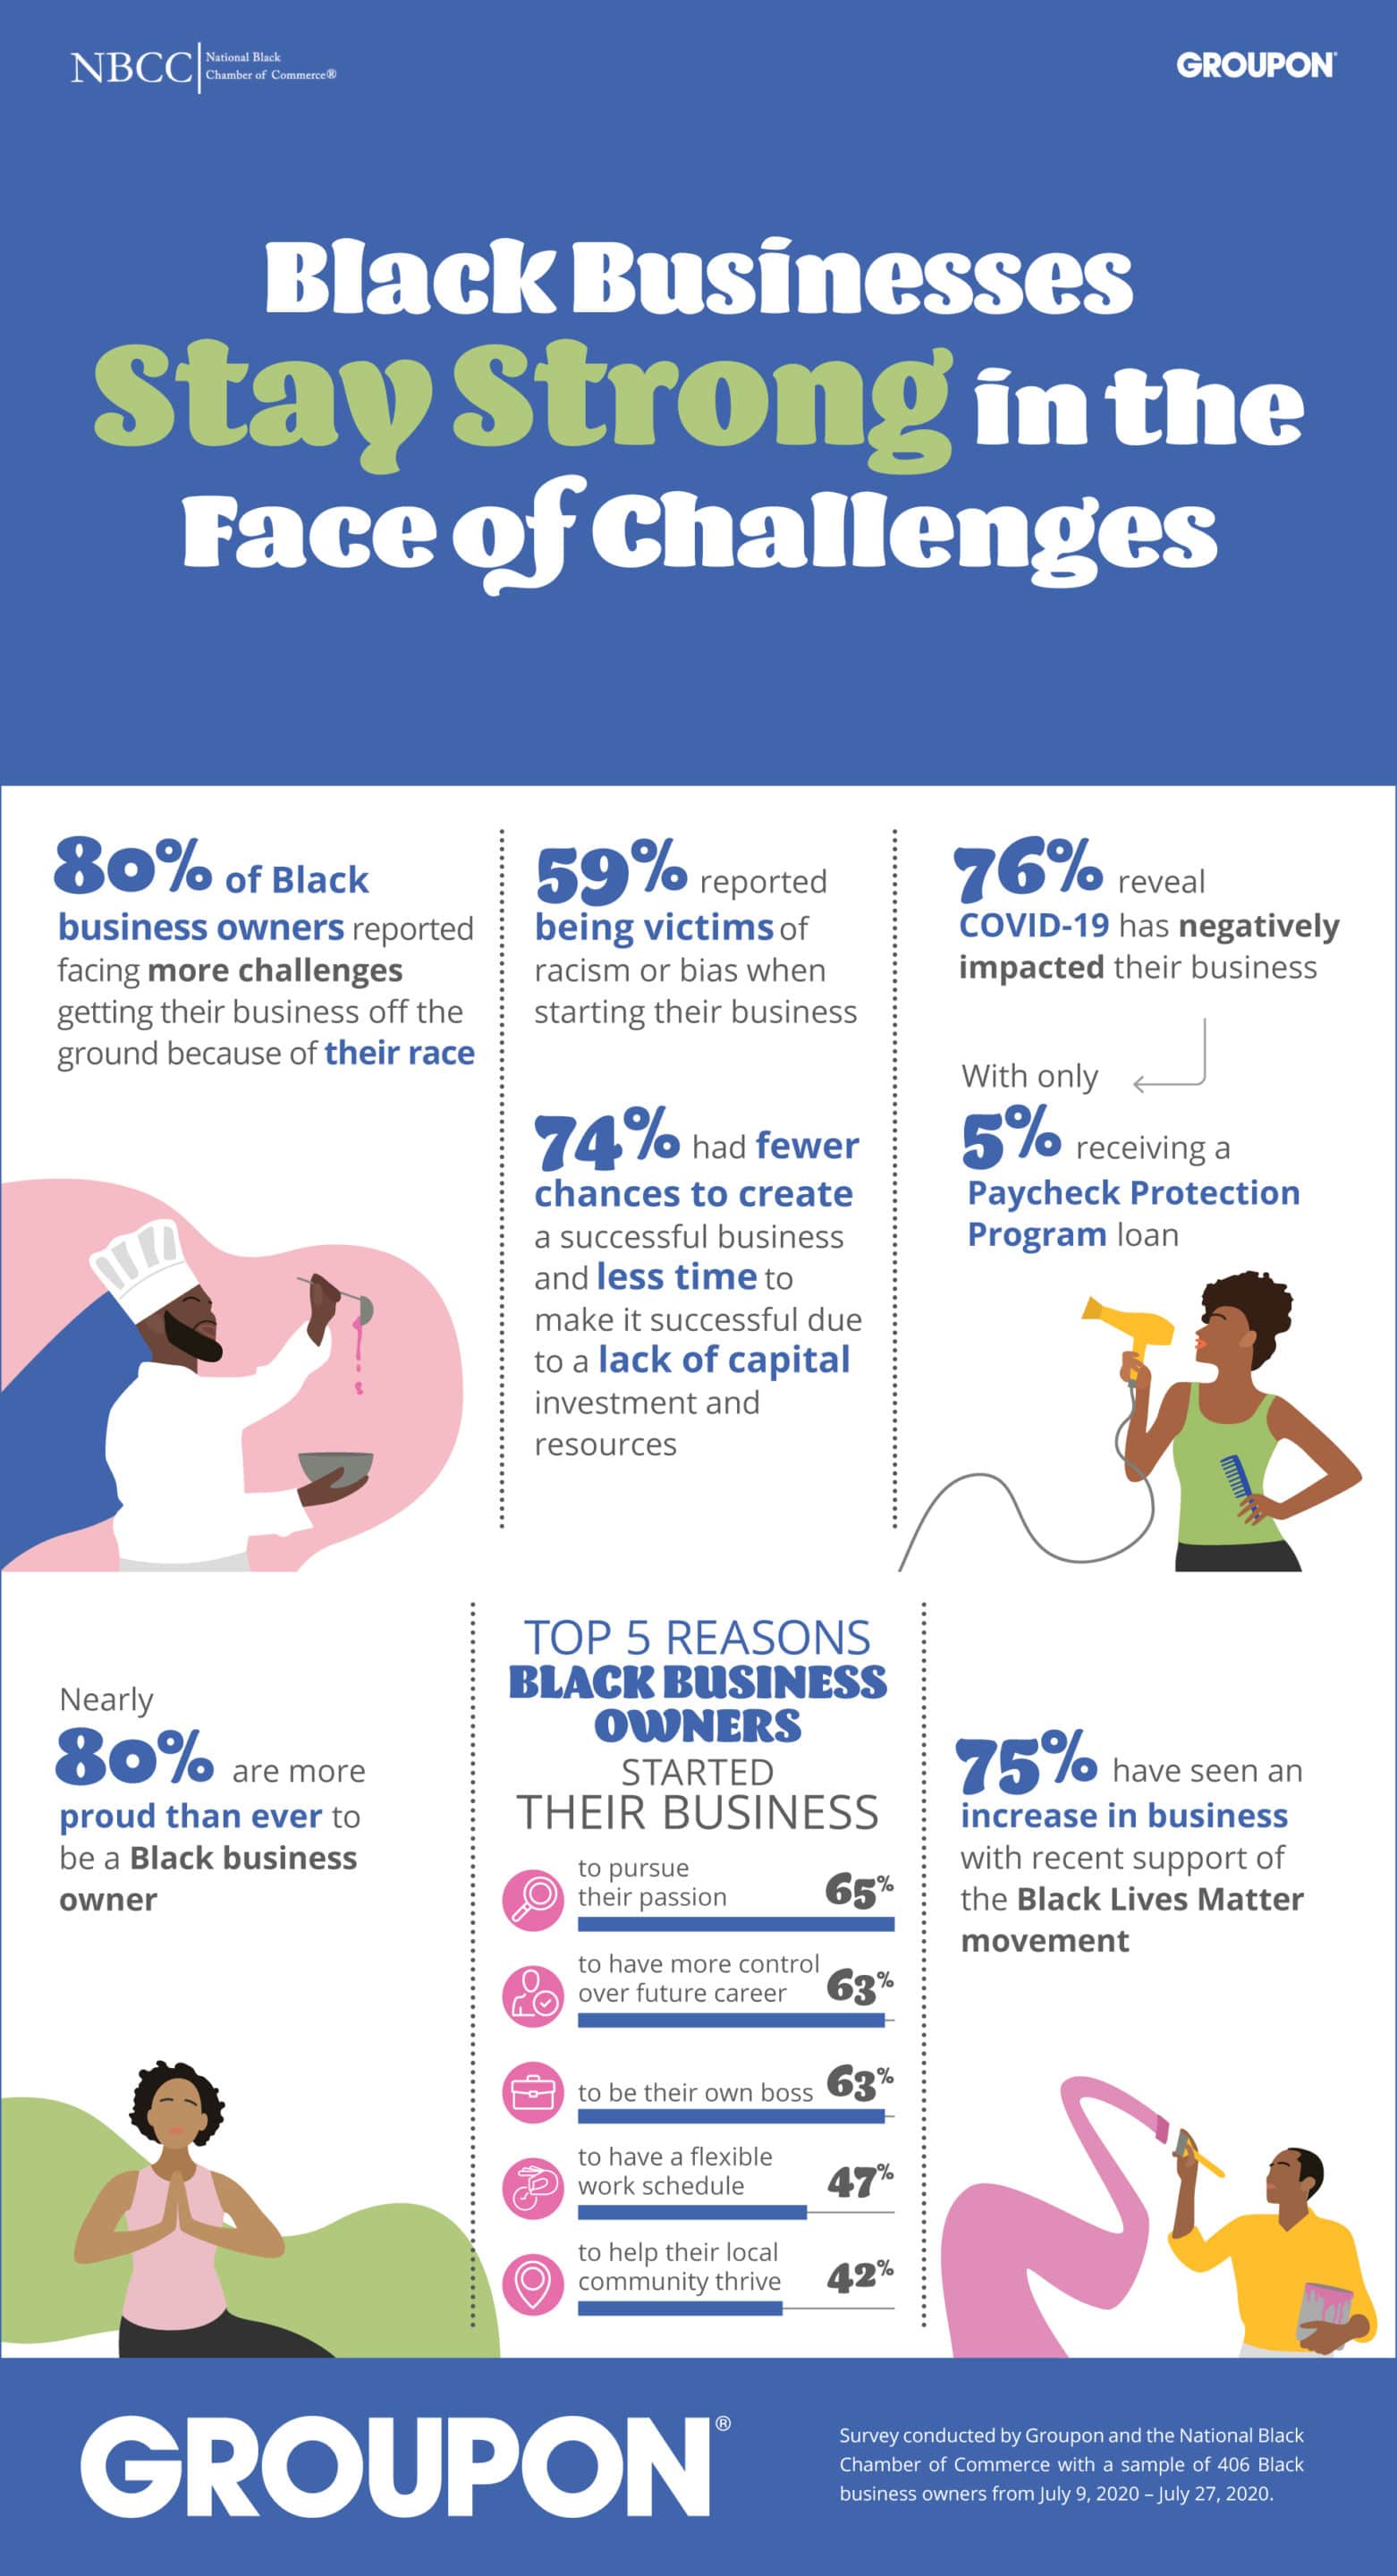 Black-owned businesses getting strong support, but greater advocacy needed